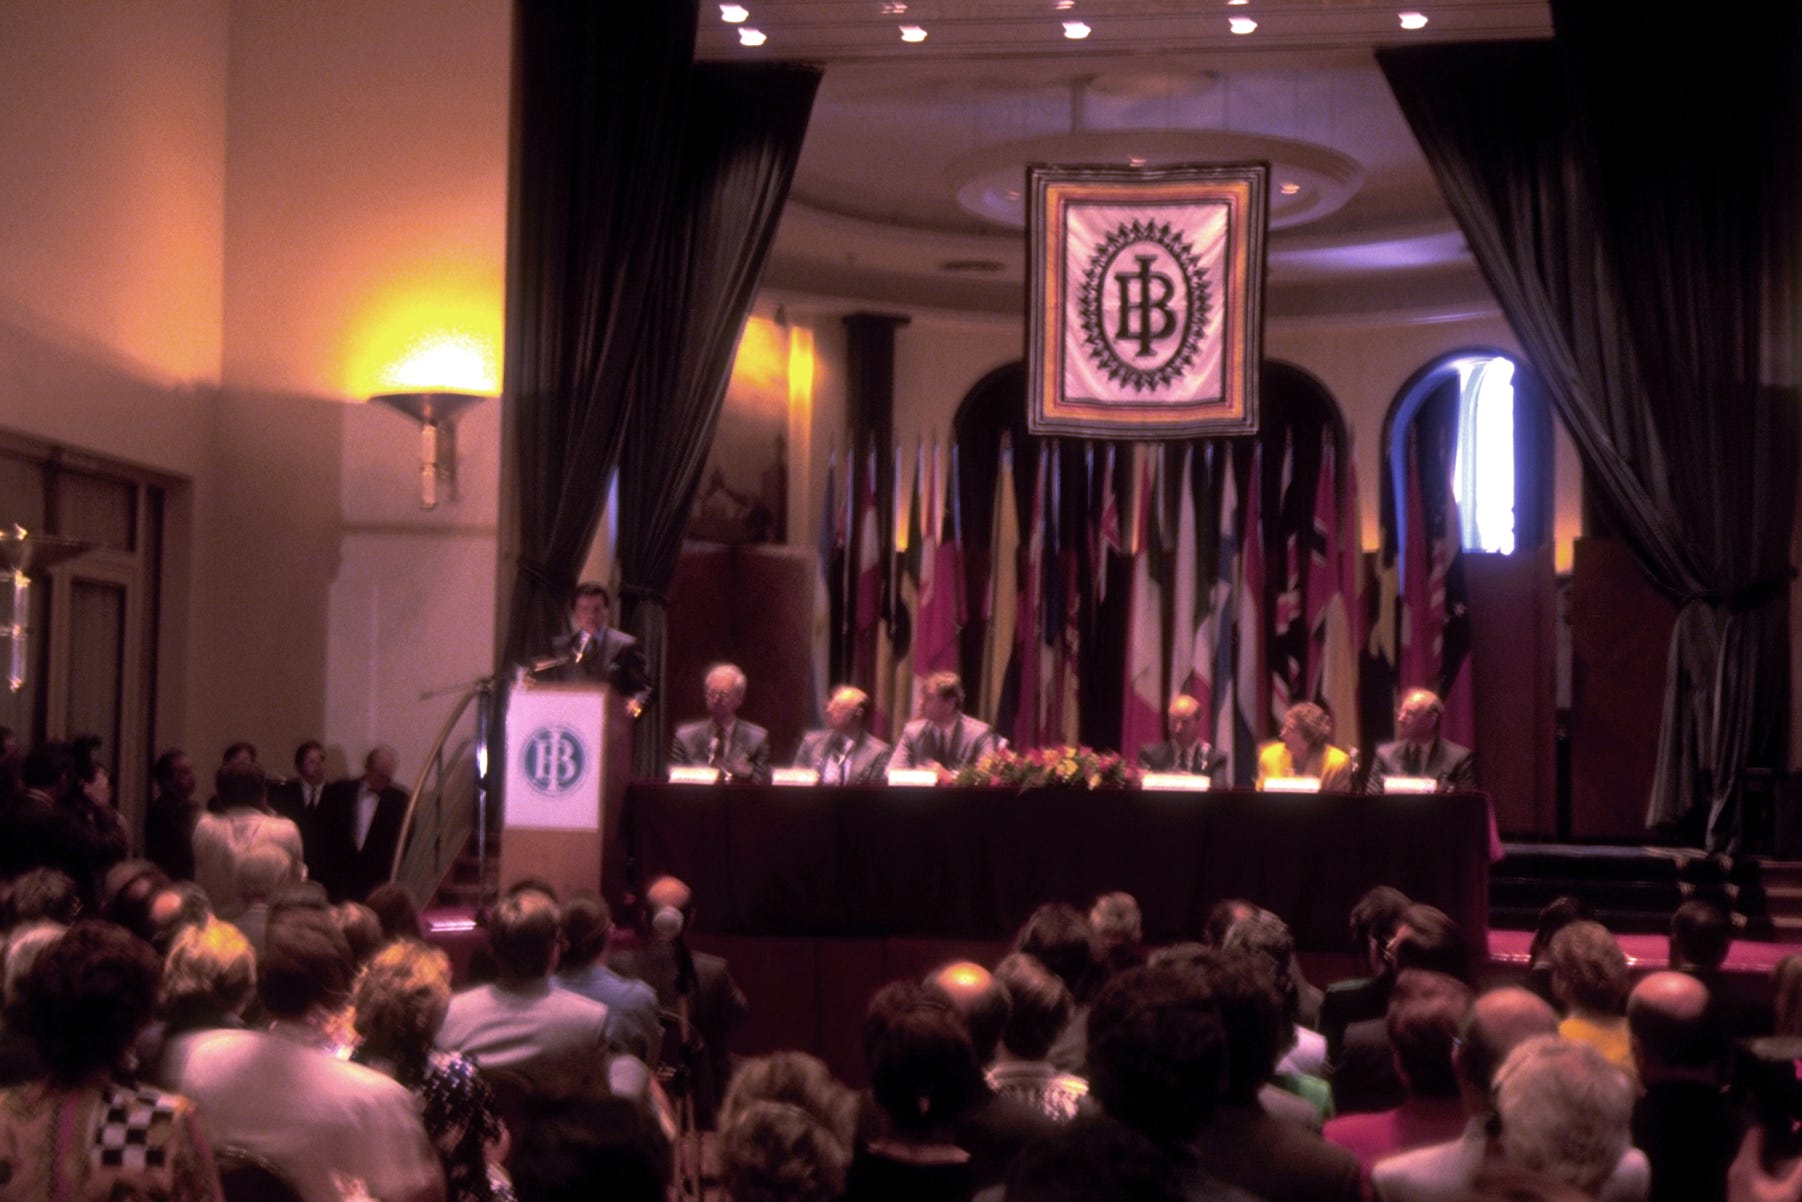 IB Heads of Schools Conference, Buenos Aires, Argentina, 1993